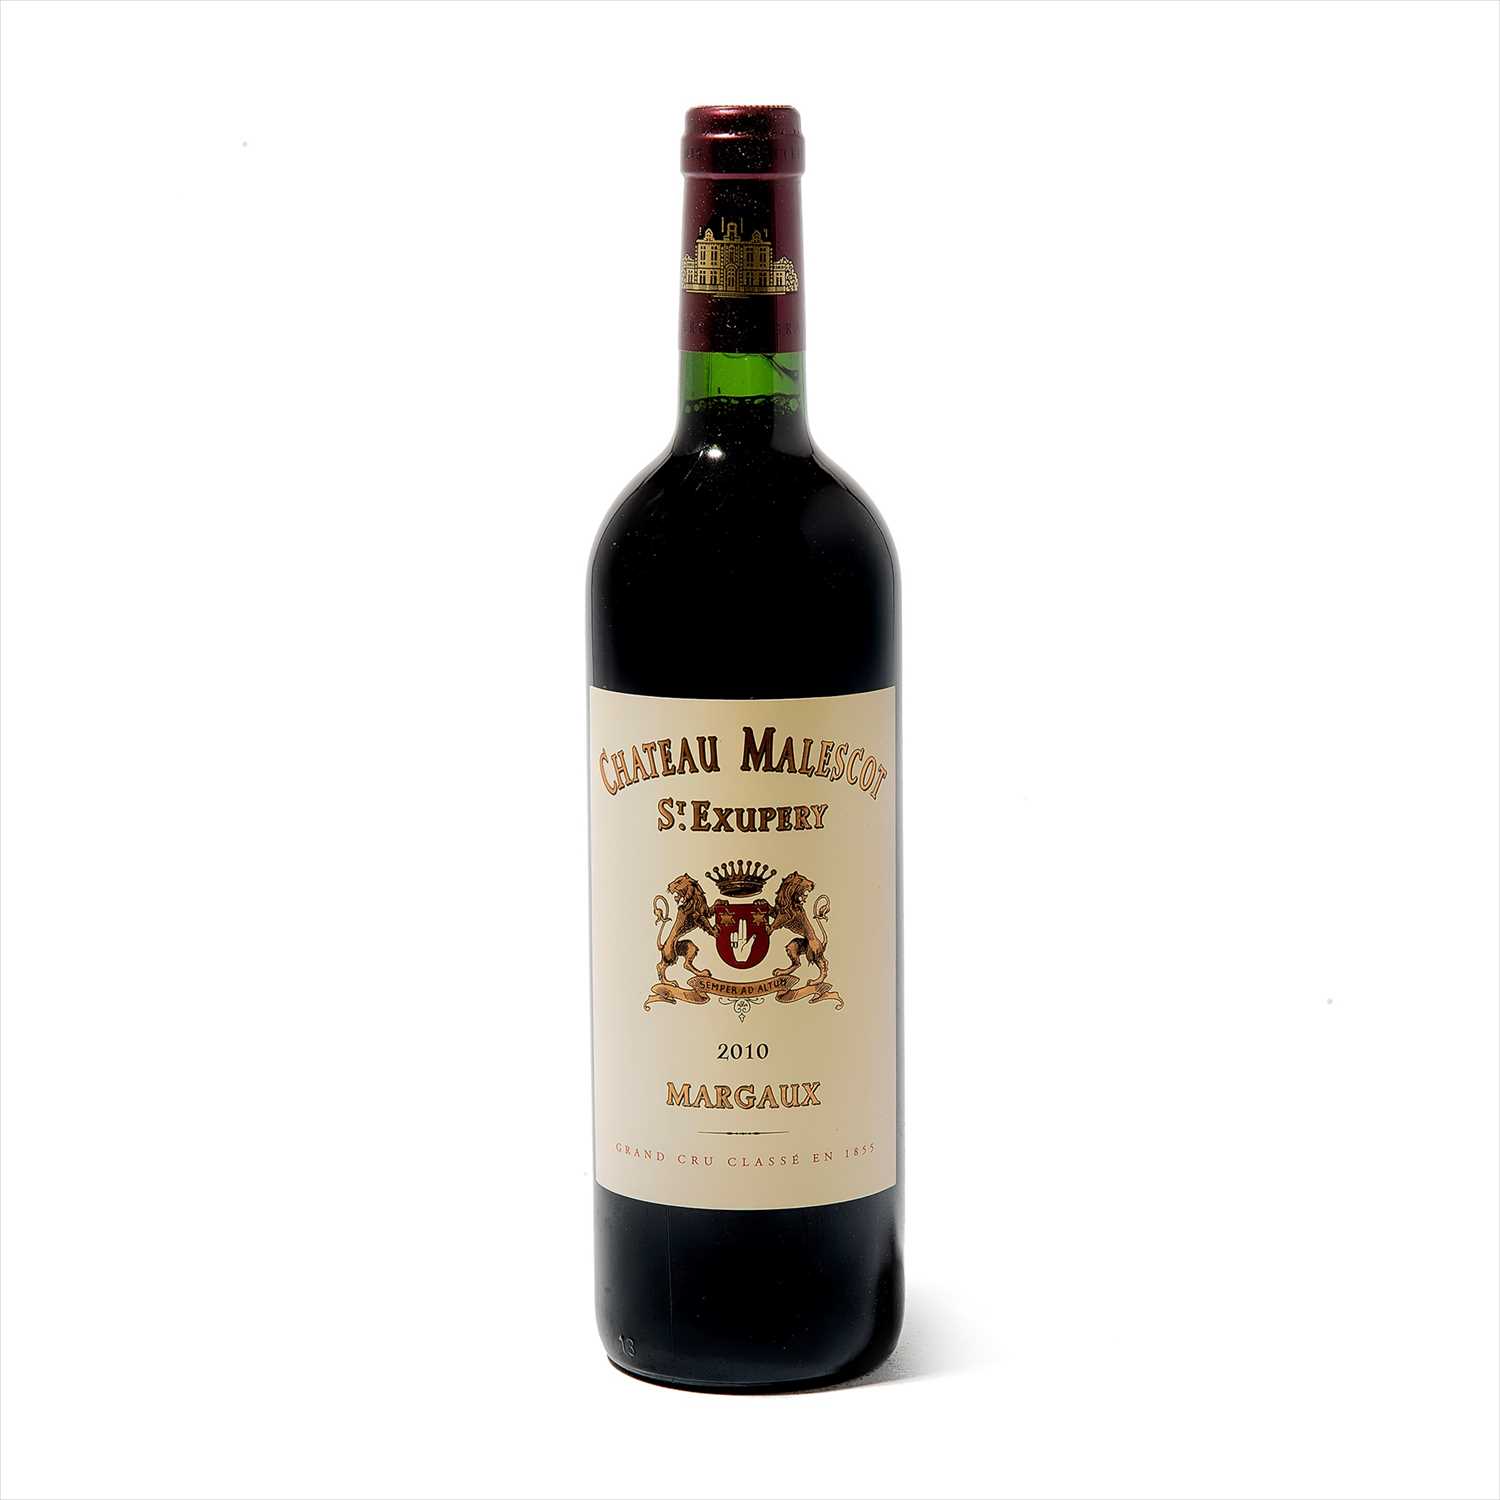 Lot 80 - 2010 Chateau Malescot St Exupery